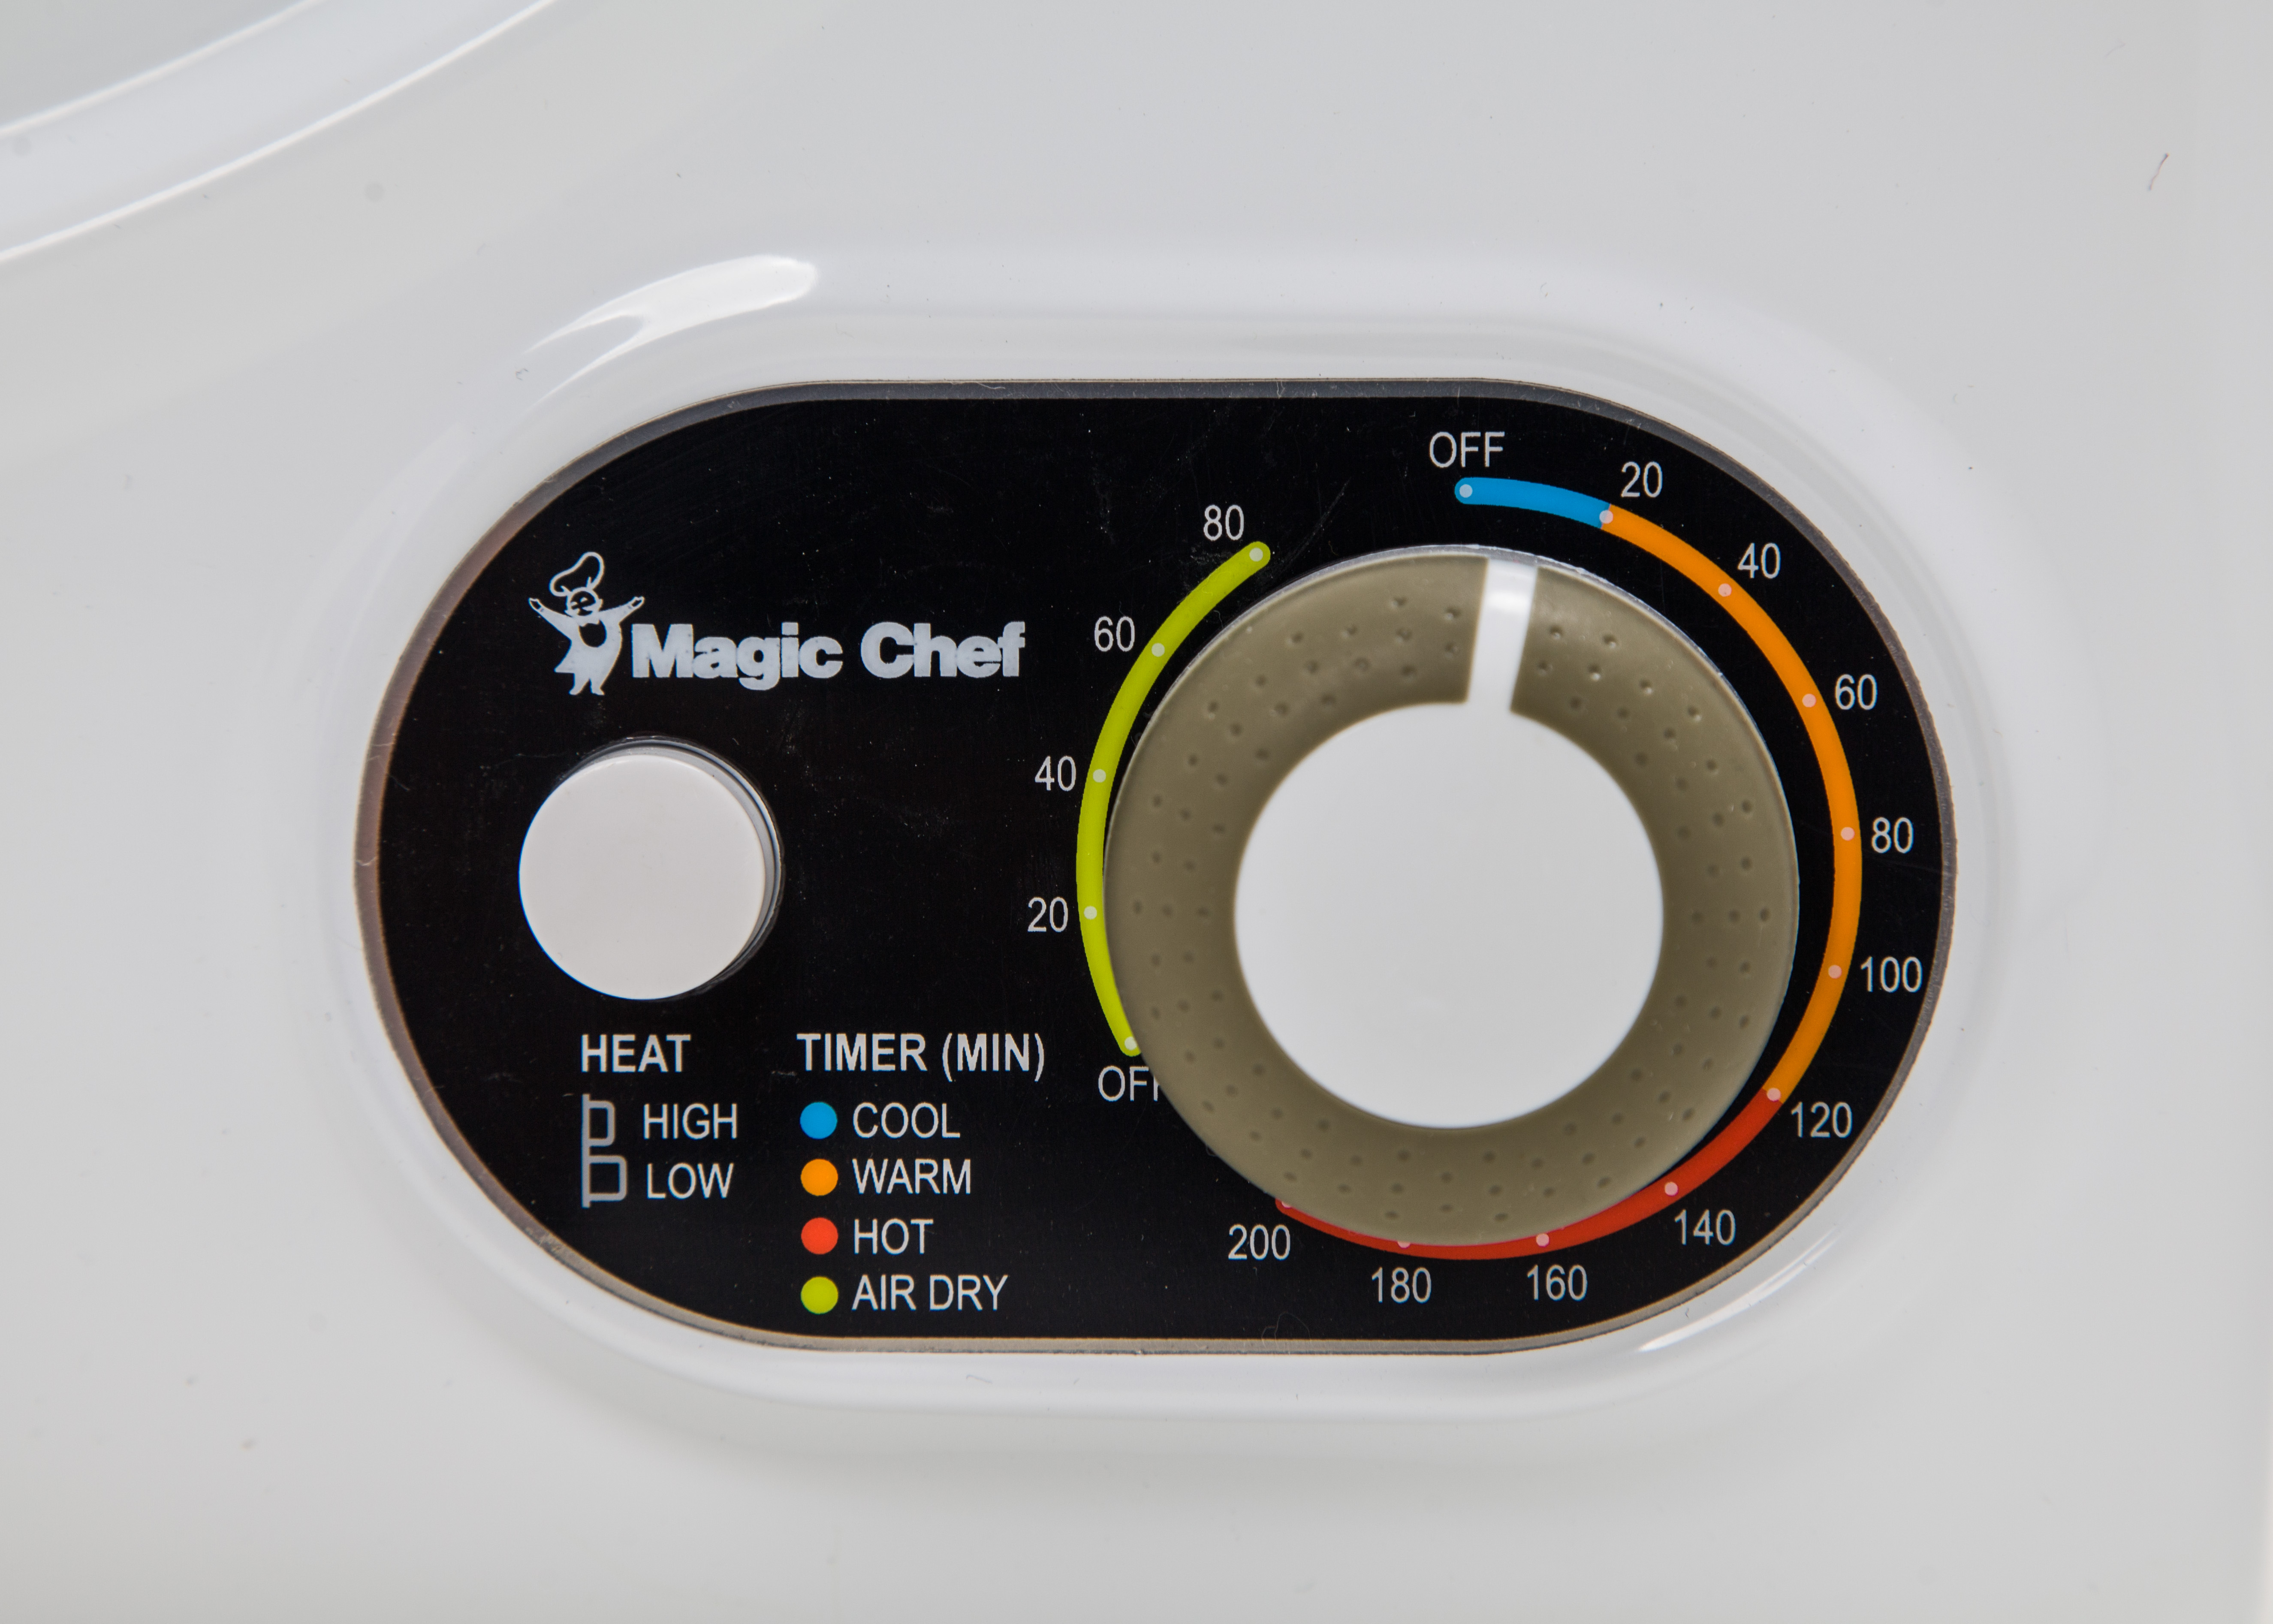 Magic Chef 1.5 Cu. ft. Compact Electric Dryer, White, 19.5 in L x 23.8 in H x 16.1 in D - image 3 of 5